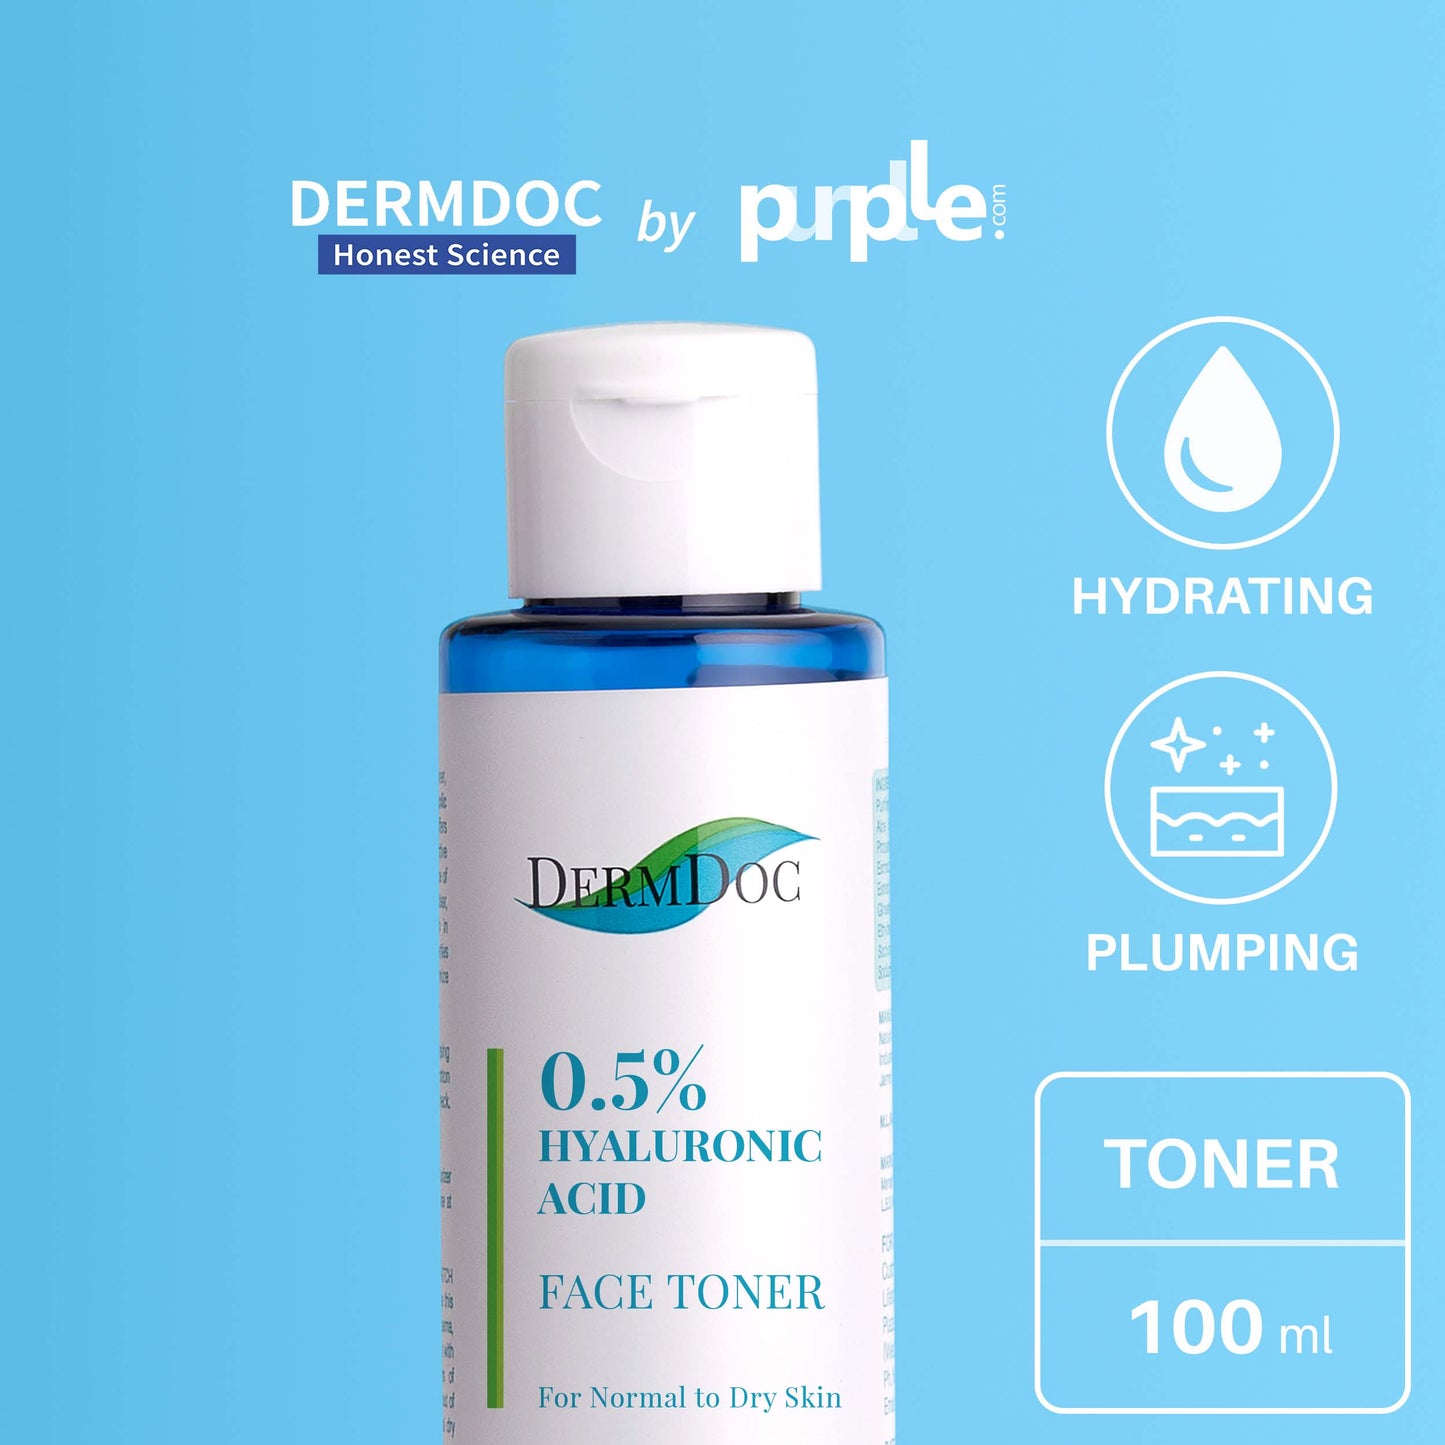 DermDoc 0.5% Pure Hyaluronic Acid Face Toner For Skin Hydration (100 ml)